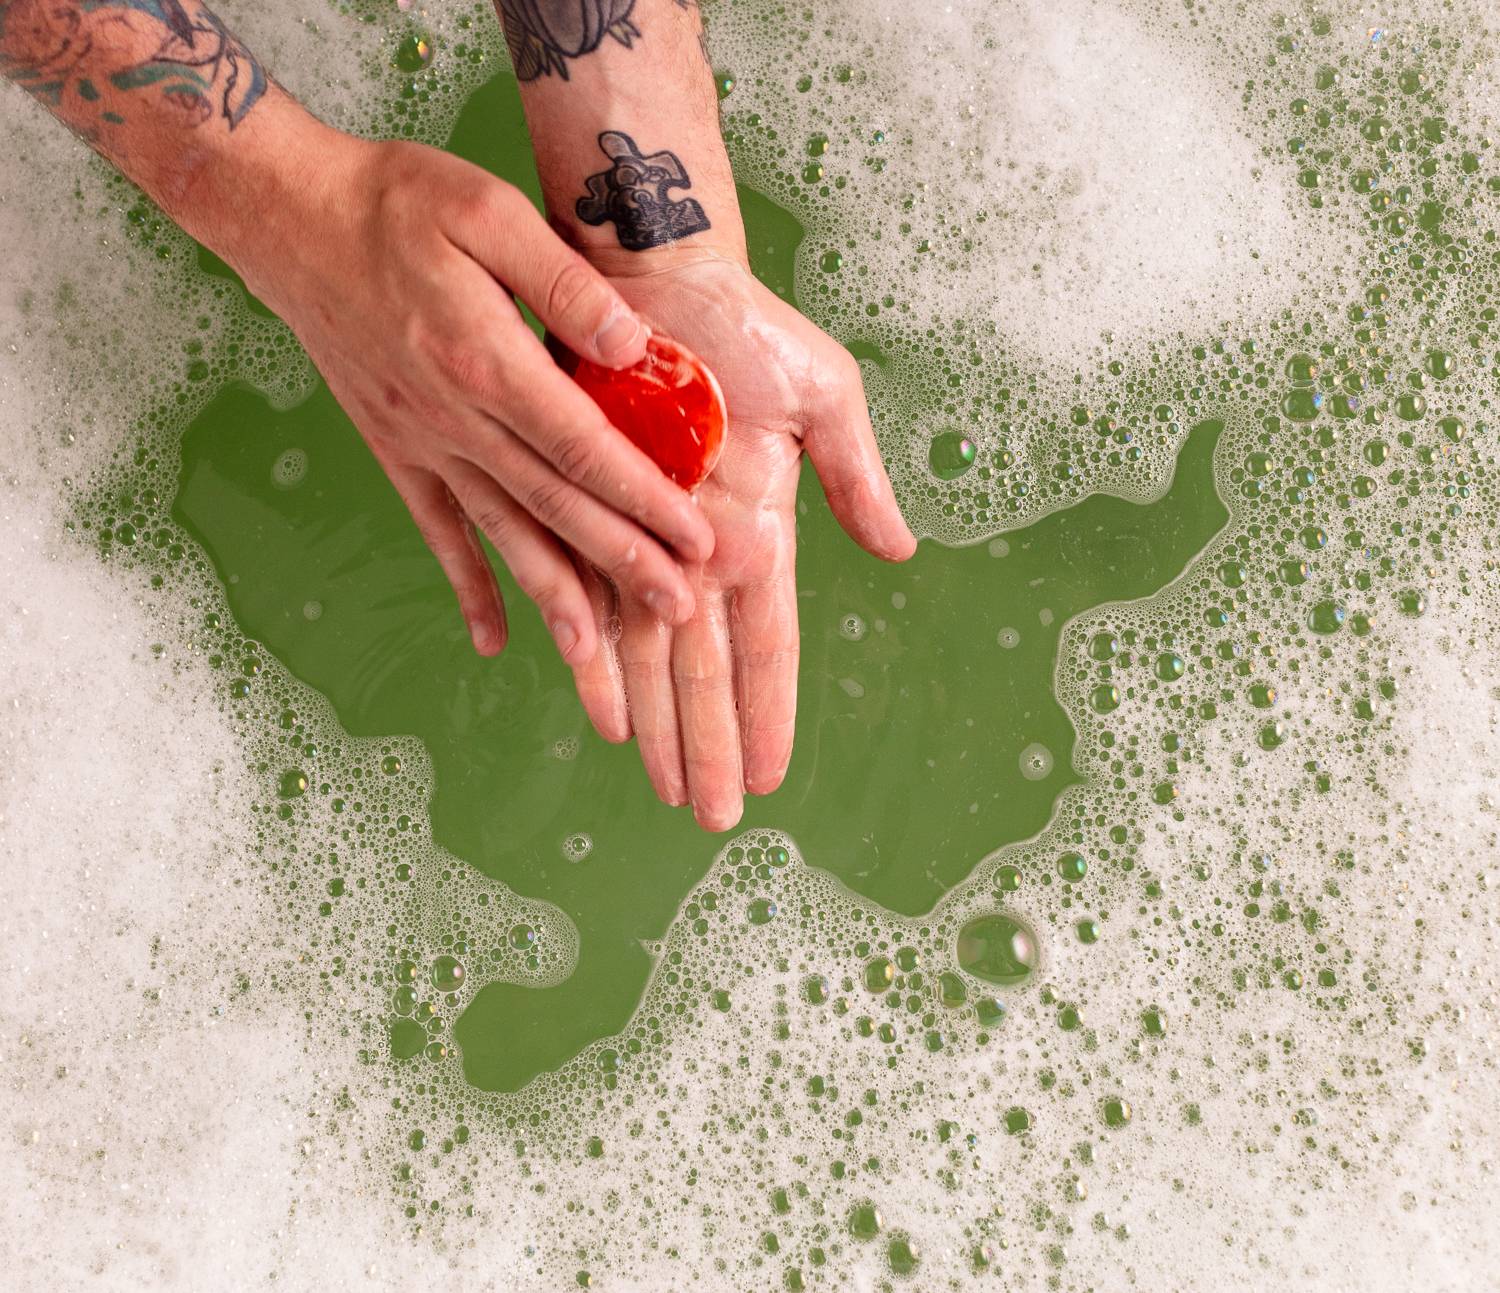 Image shows the model using the tomato-shaped soap in the bath water surrounded by bubbles.